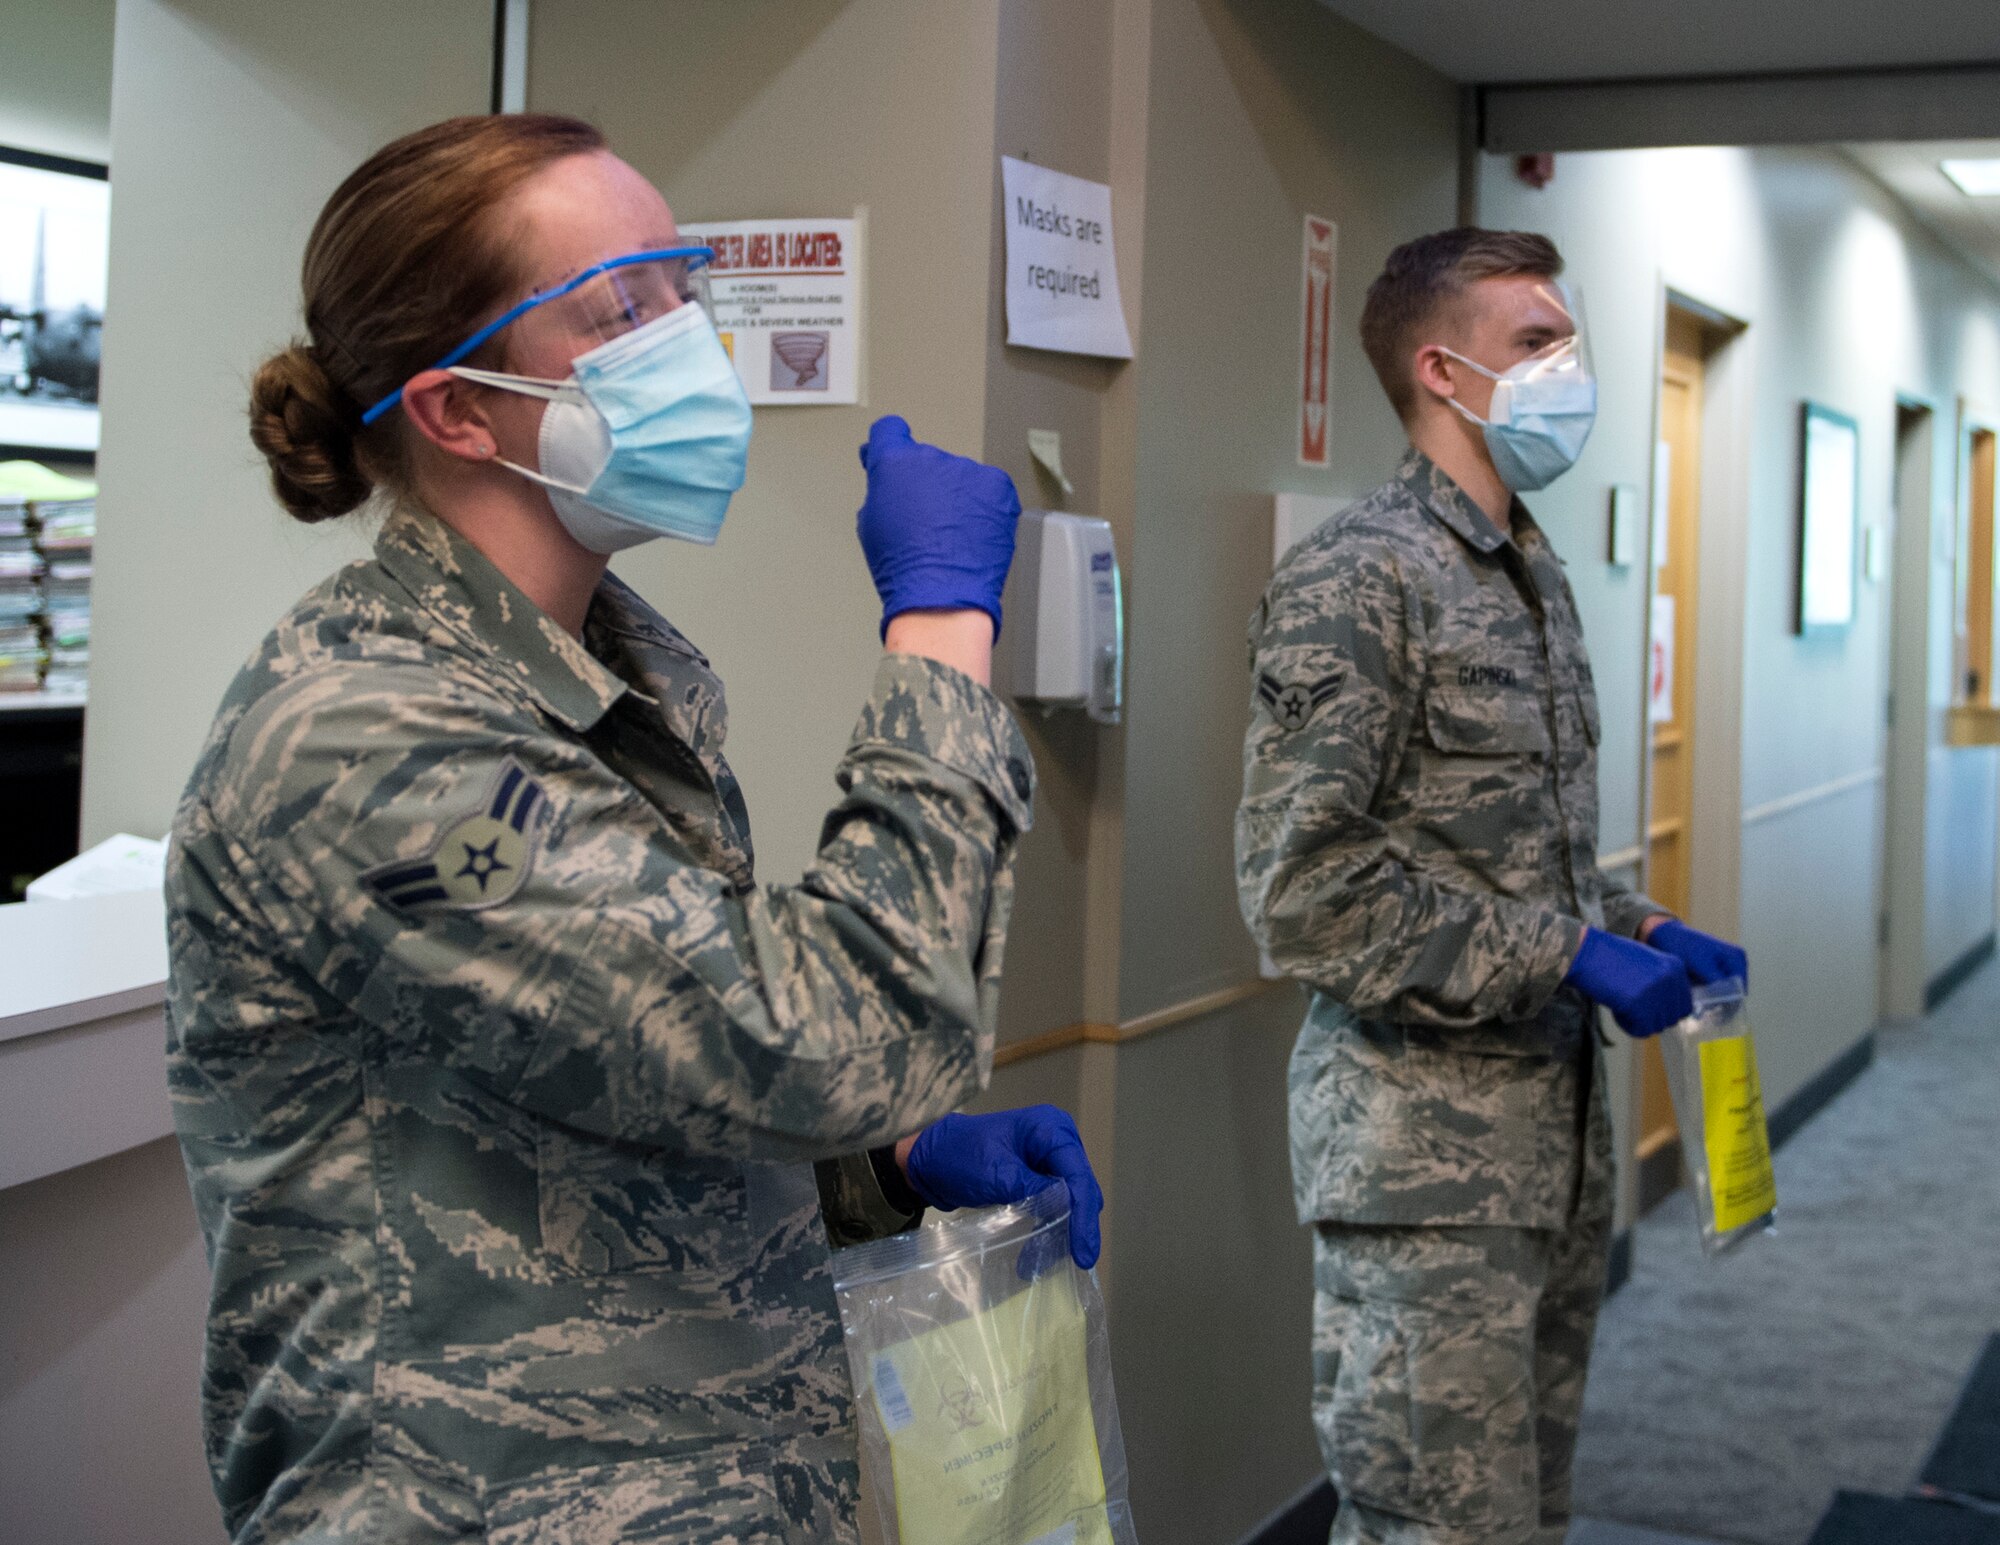 U.S. Air Force Airmen from the 133rd Medical Group, provide instructions on how to administer the COVID-19 test in St. Paul, Minn., June 4, 2020.